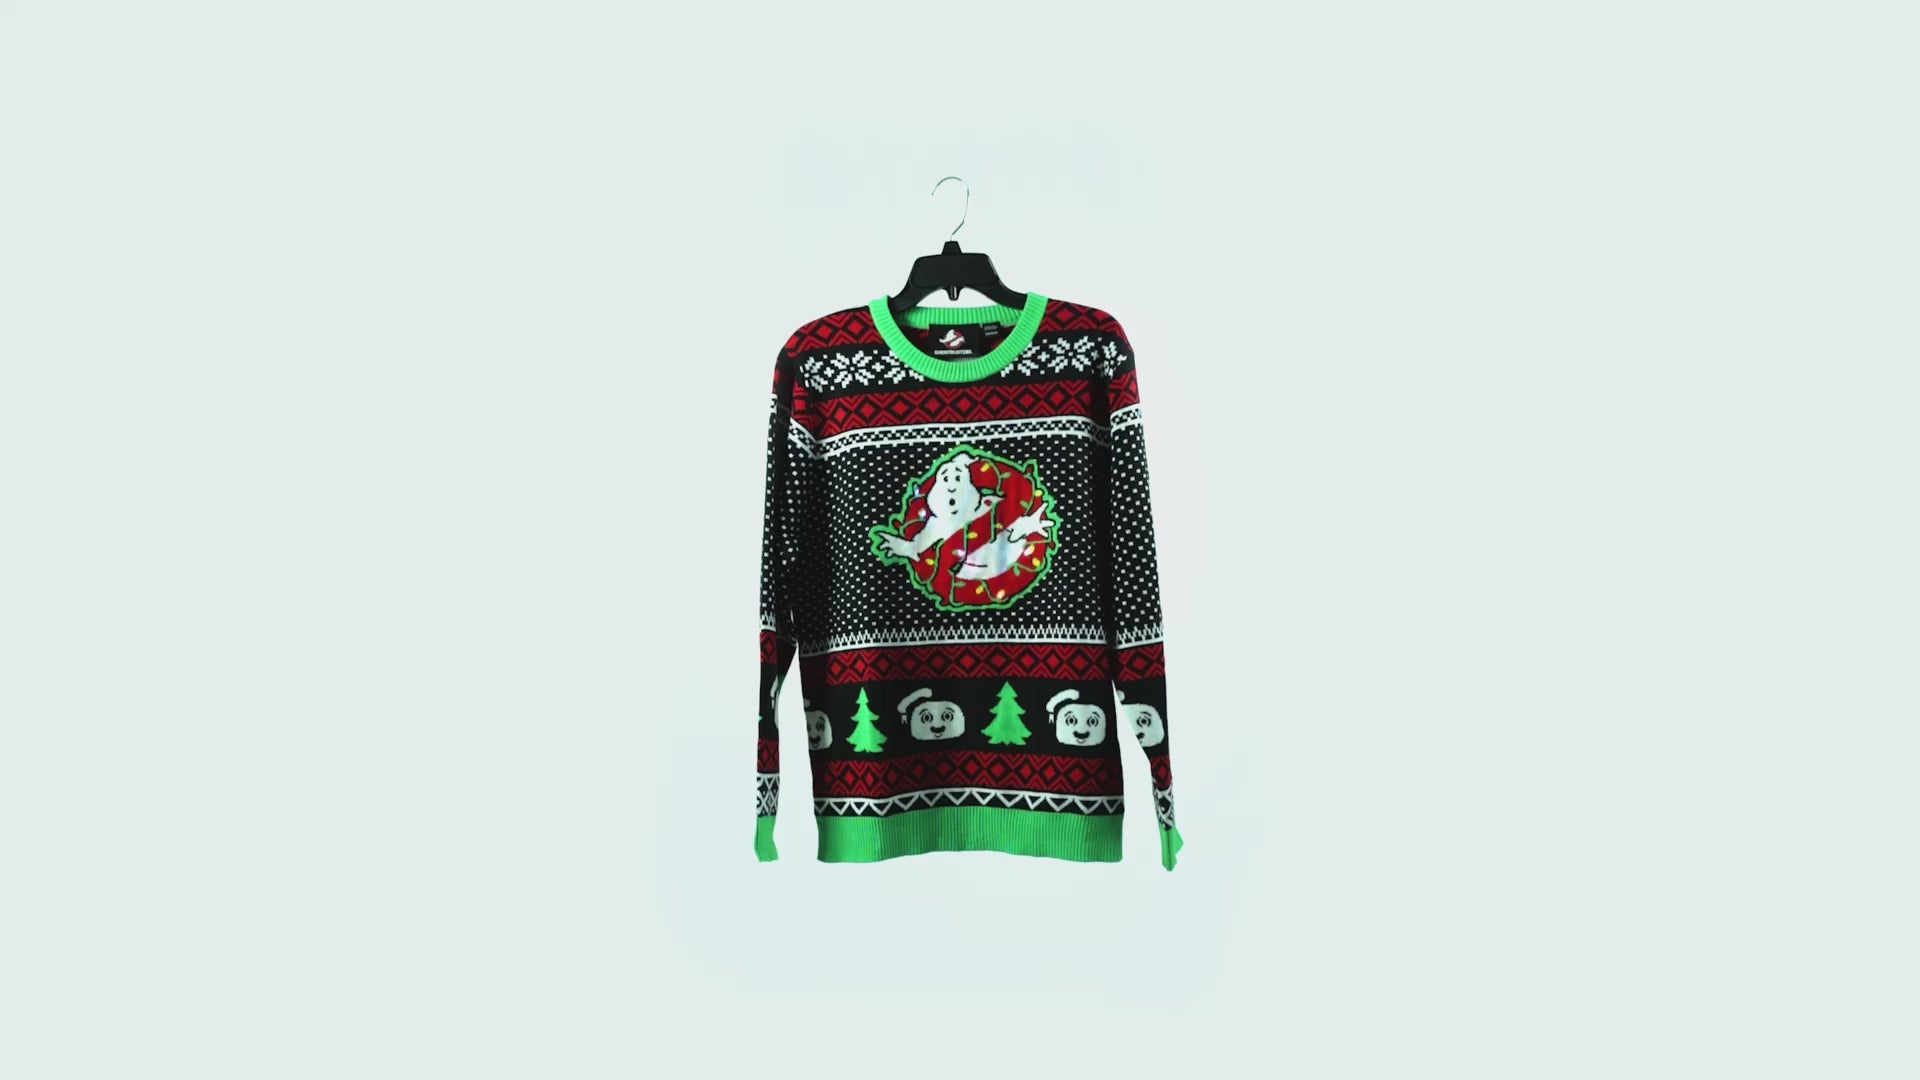 Ghostbusters LED Light-Up Ugly Christmas Sweater